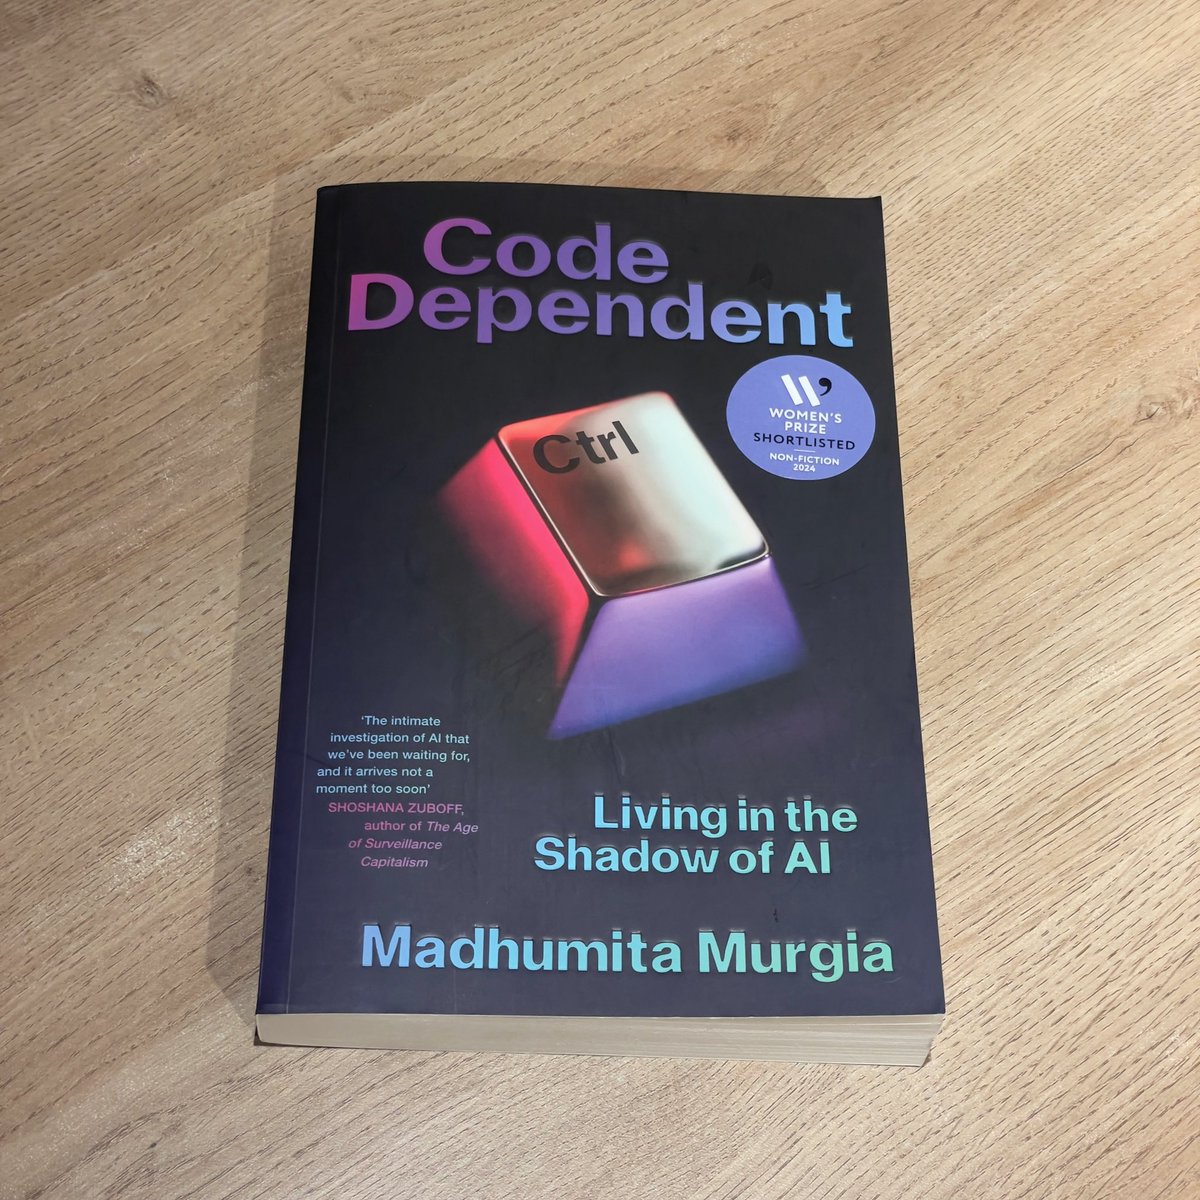 Morning! What are you reading today? I’m still wrapping my head around this wonderful book by @madhumita29. This should be made an essential reading for all. @PanMacIndia @TeestaGuha